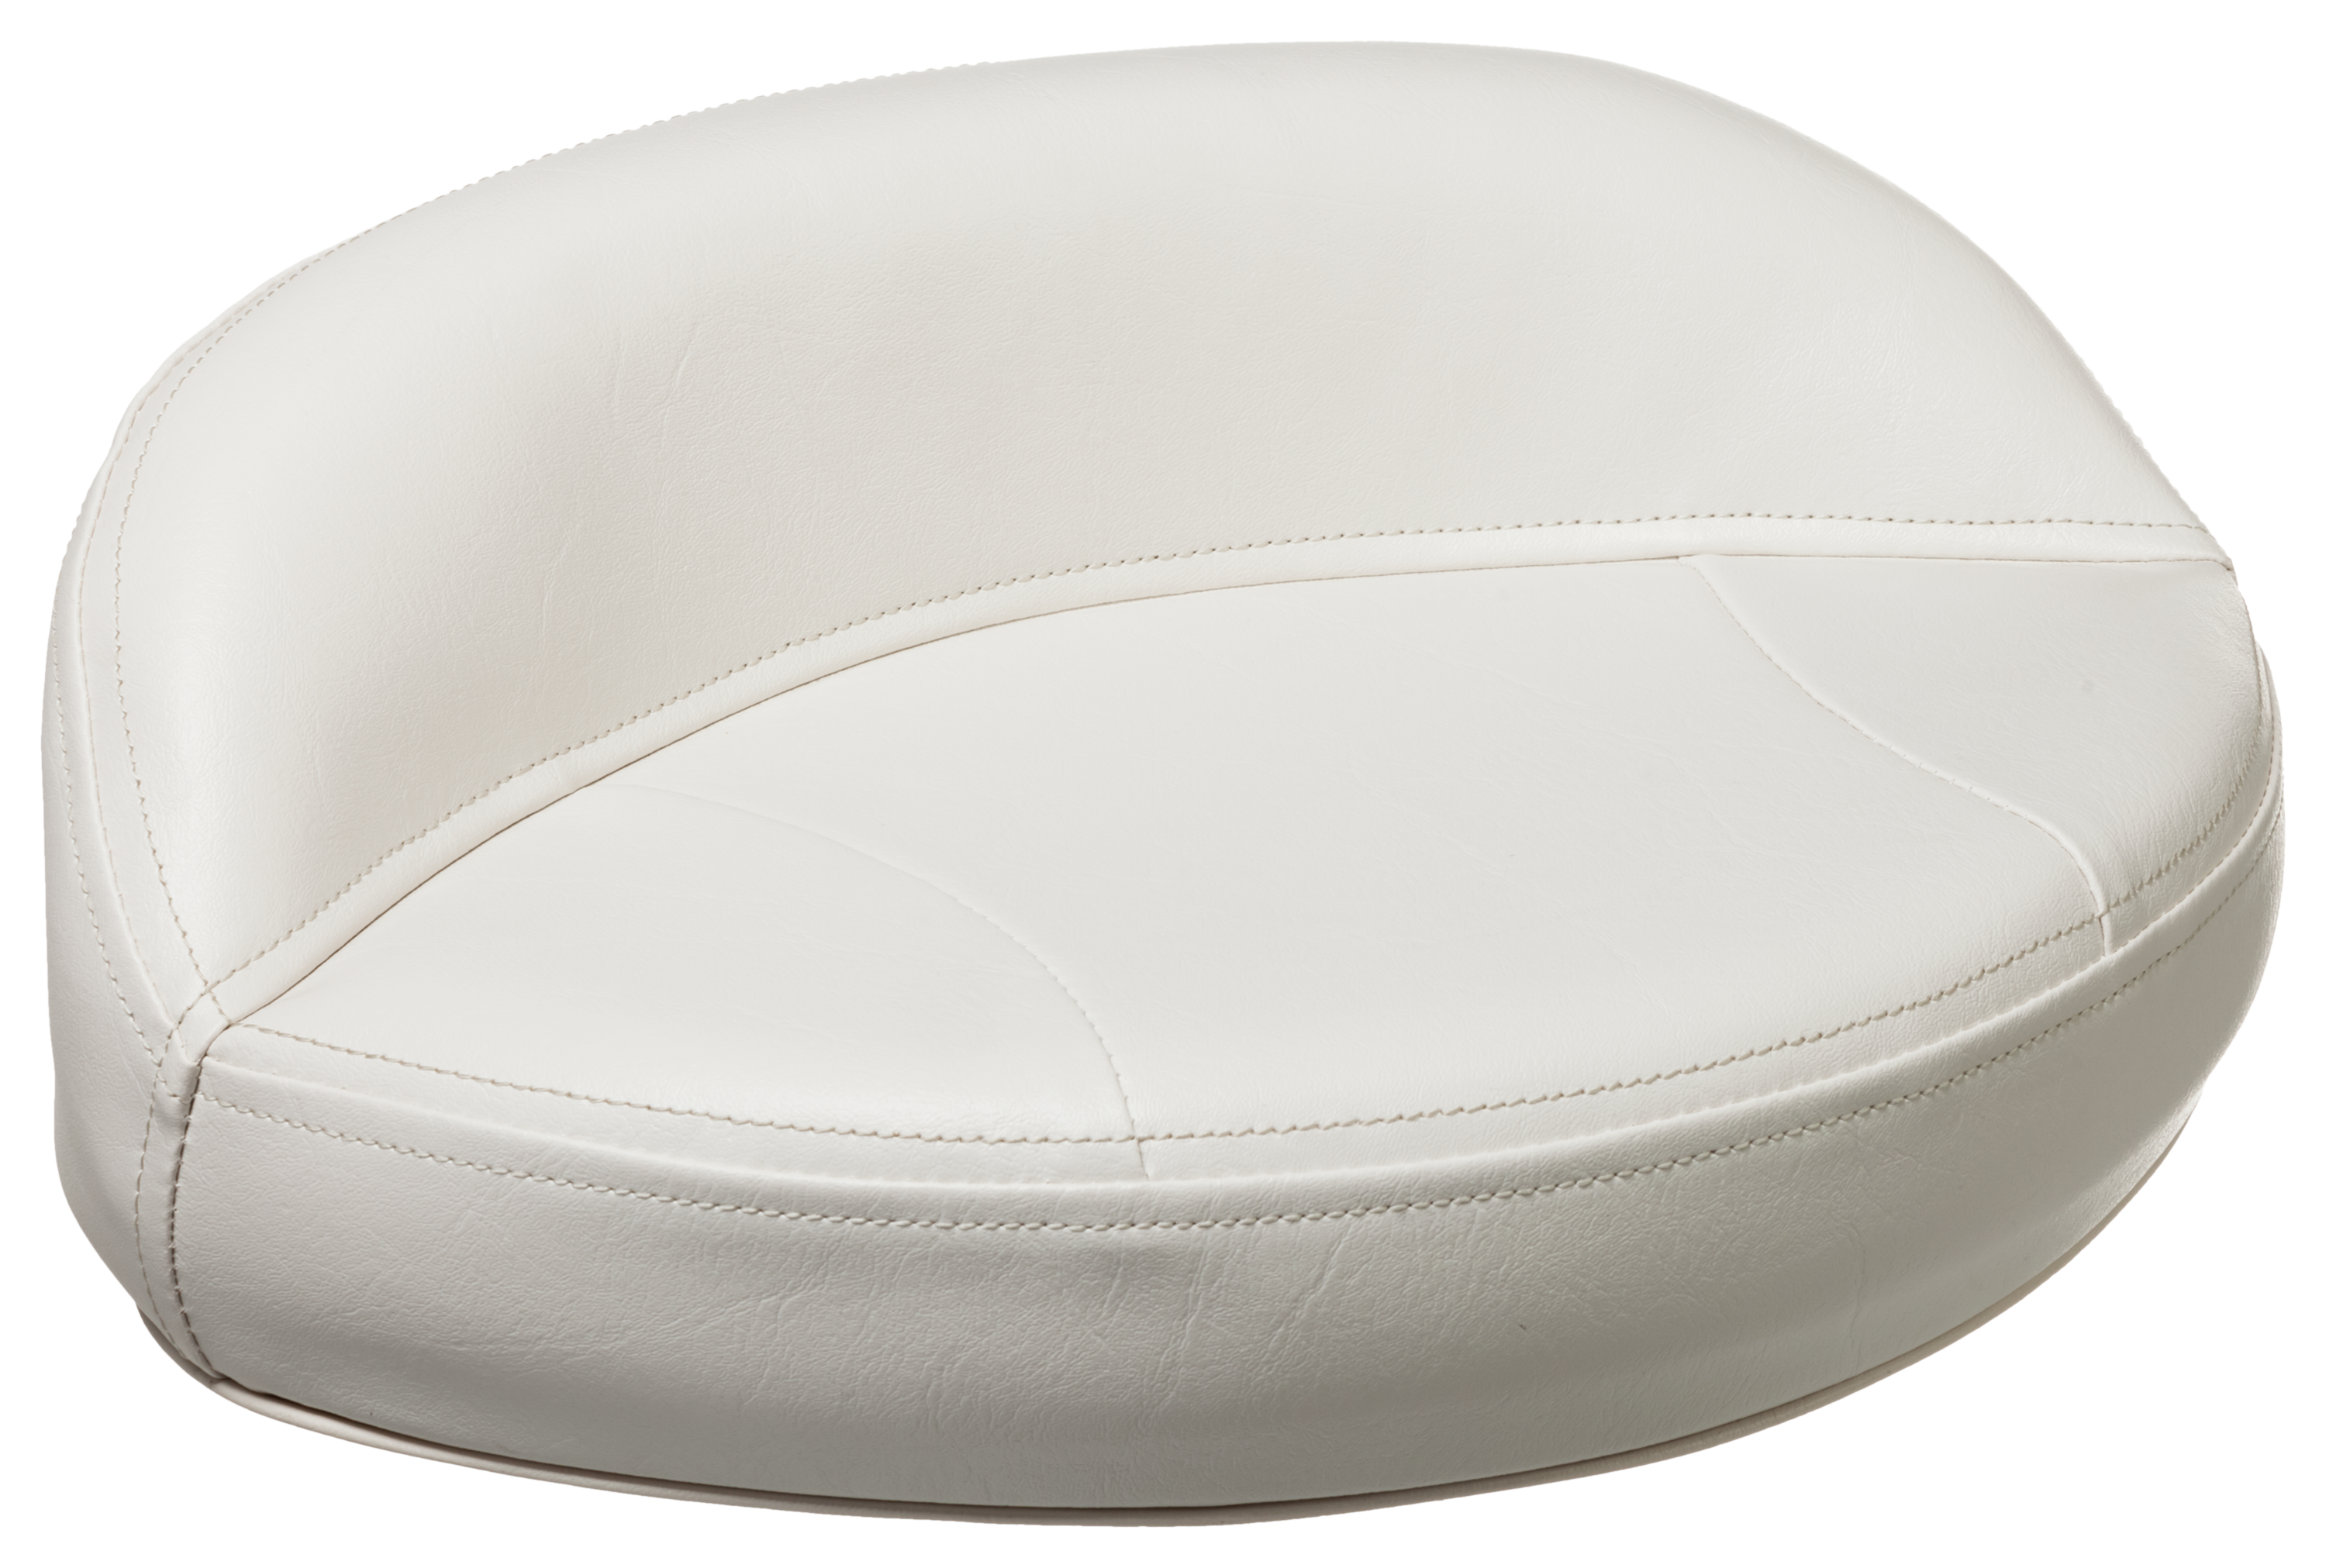 Bass Pro Shops Tourney Special Pro Butt Seat - White